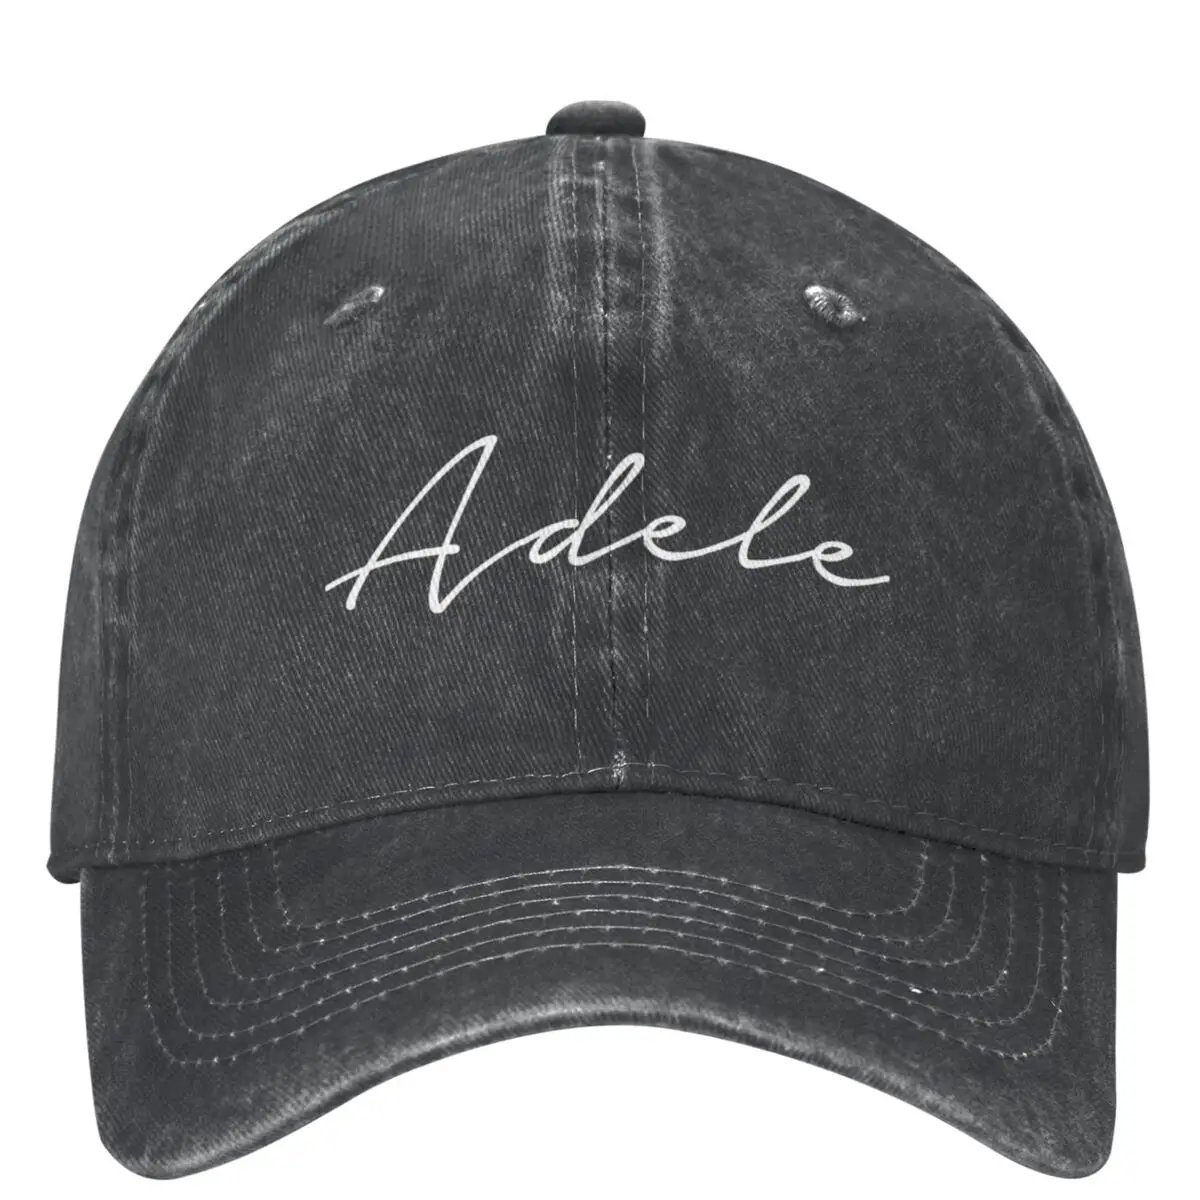 

Adele Baseball Caps Outfit Casual Distressed Denim Washed Snapback Dad Hat for Men Women All Seasons Travel Caps Hat